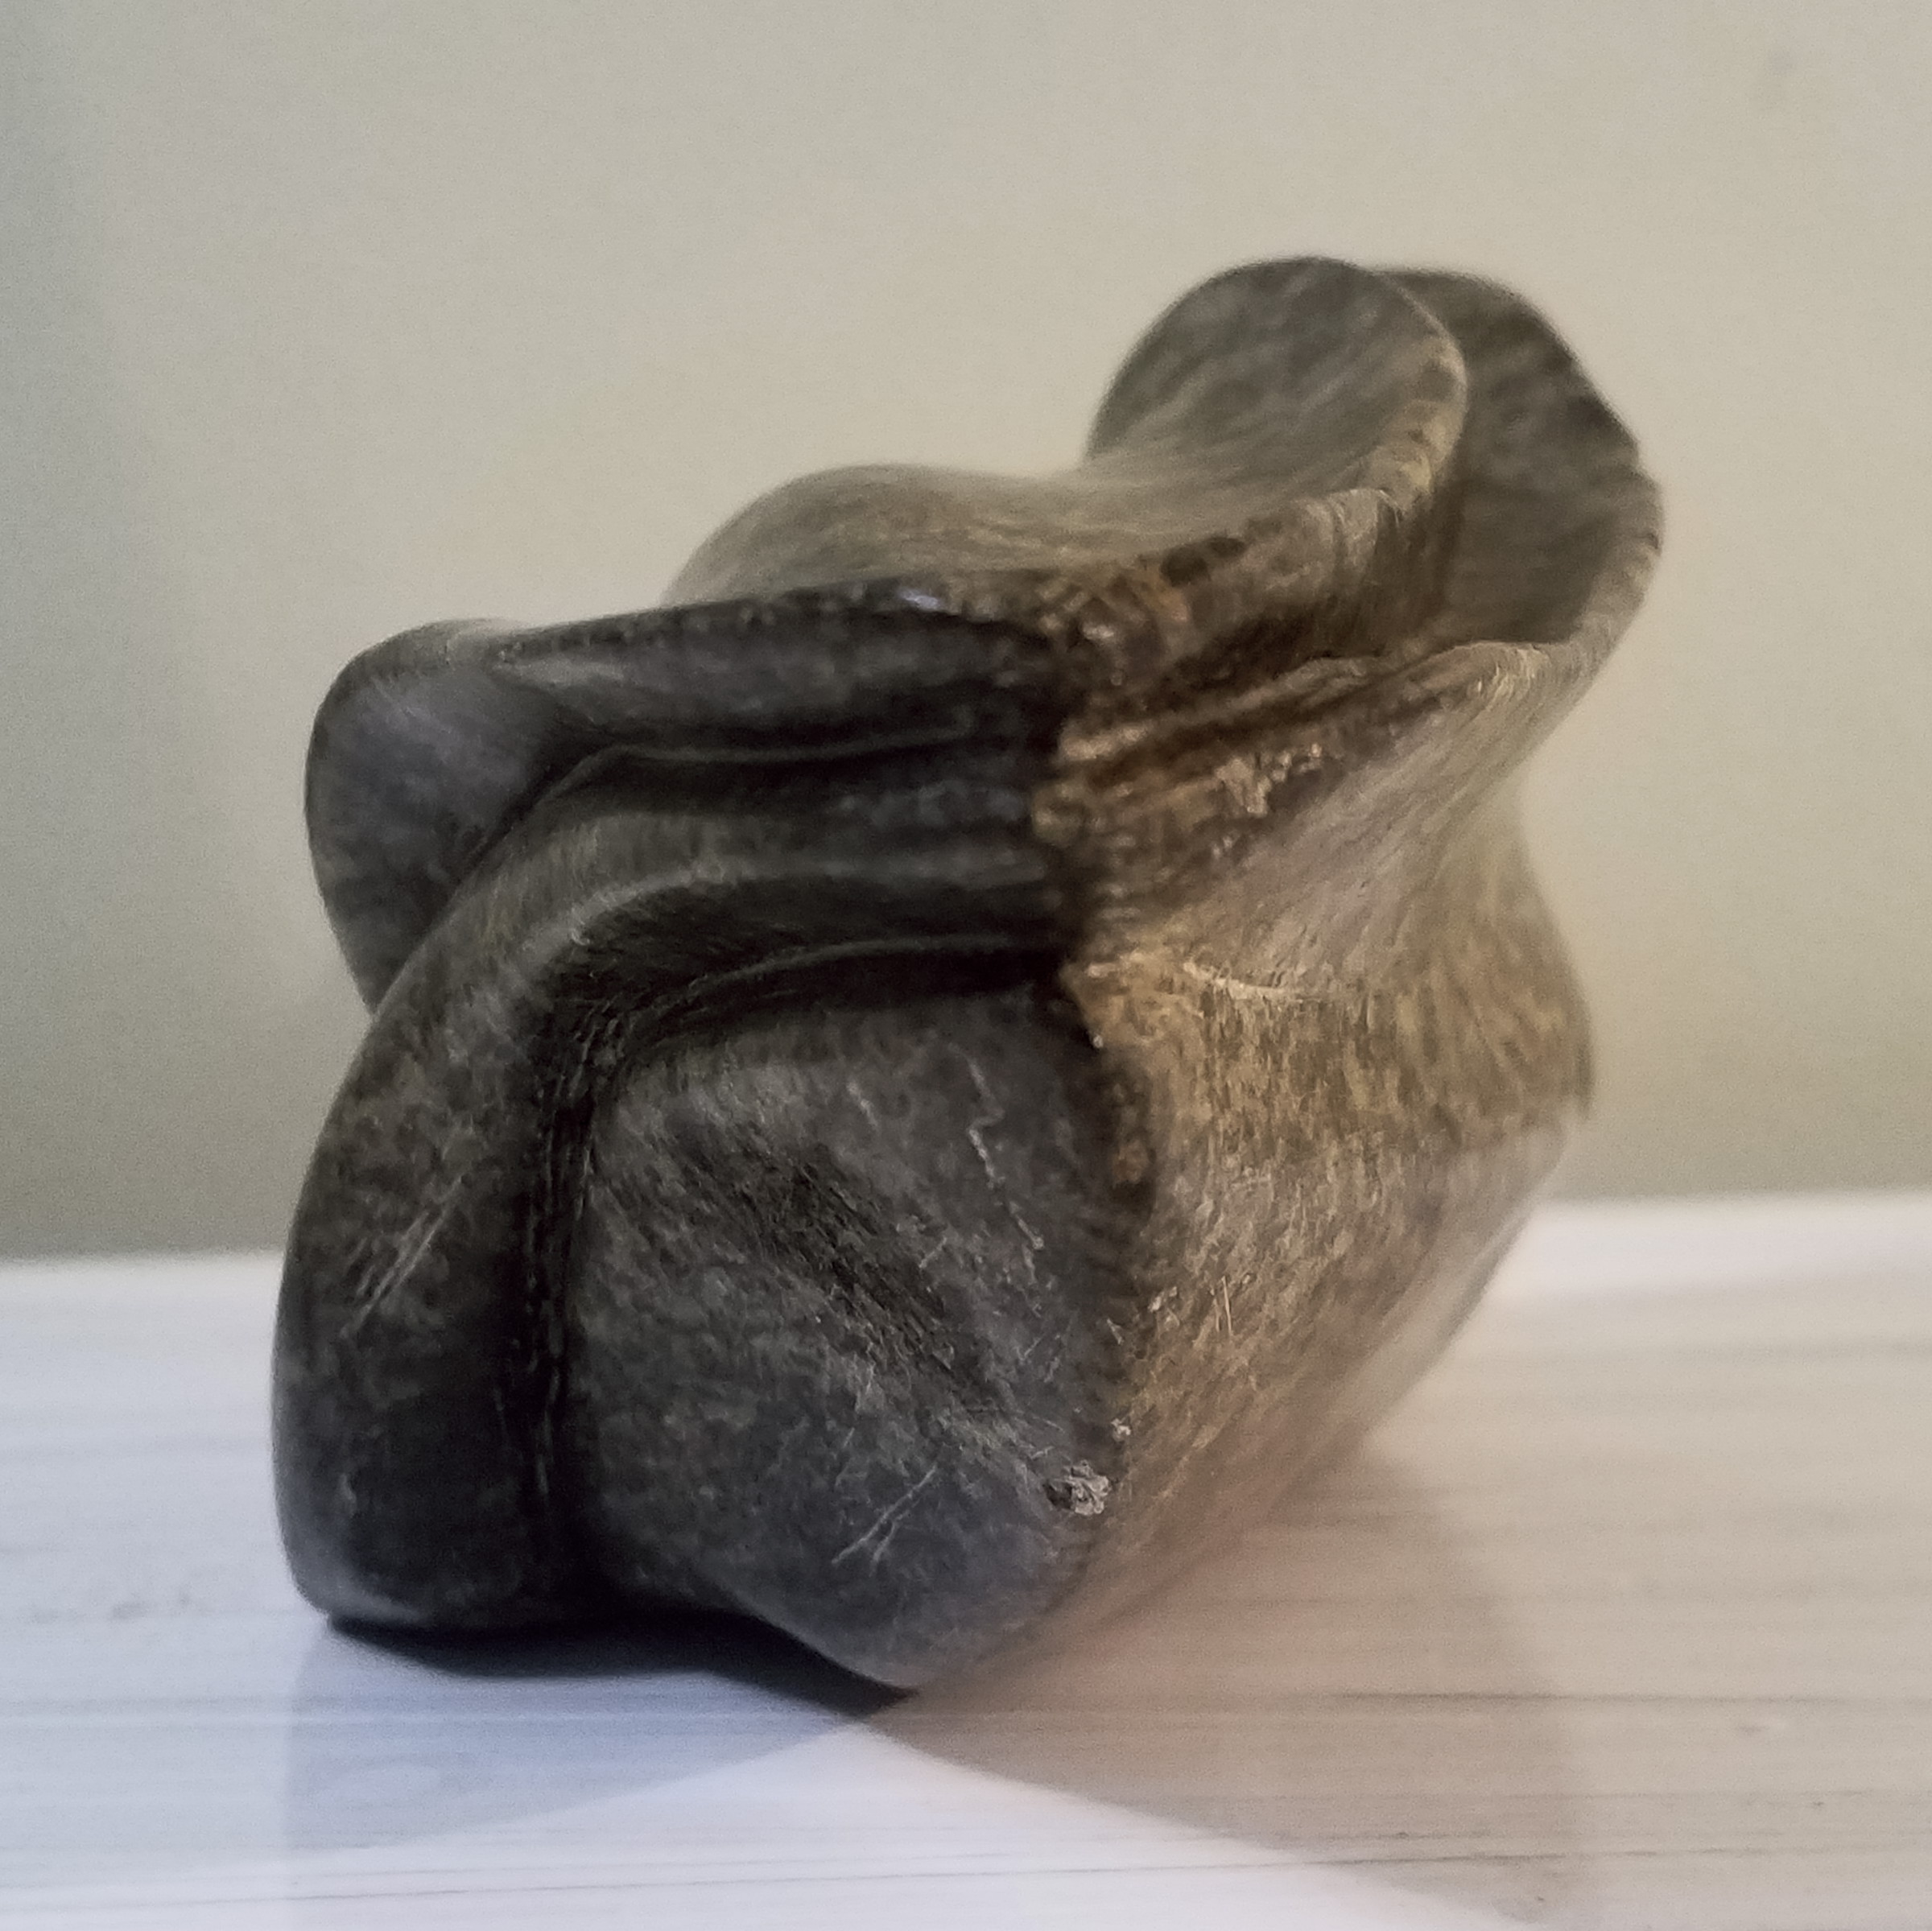 Soapstone carving - abstract-ish - signed | Antiques Board